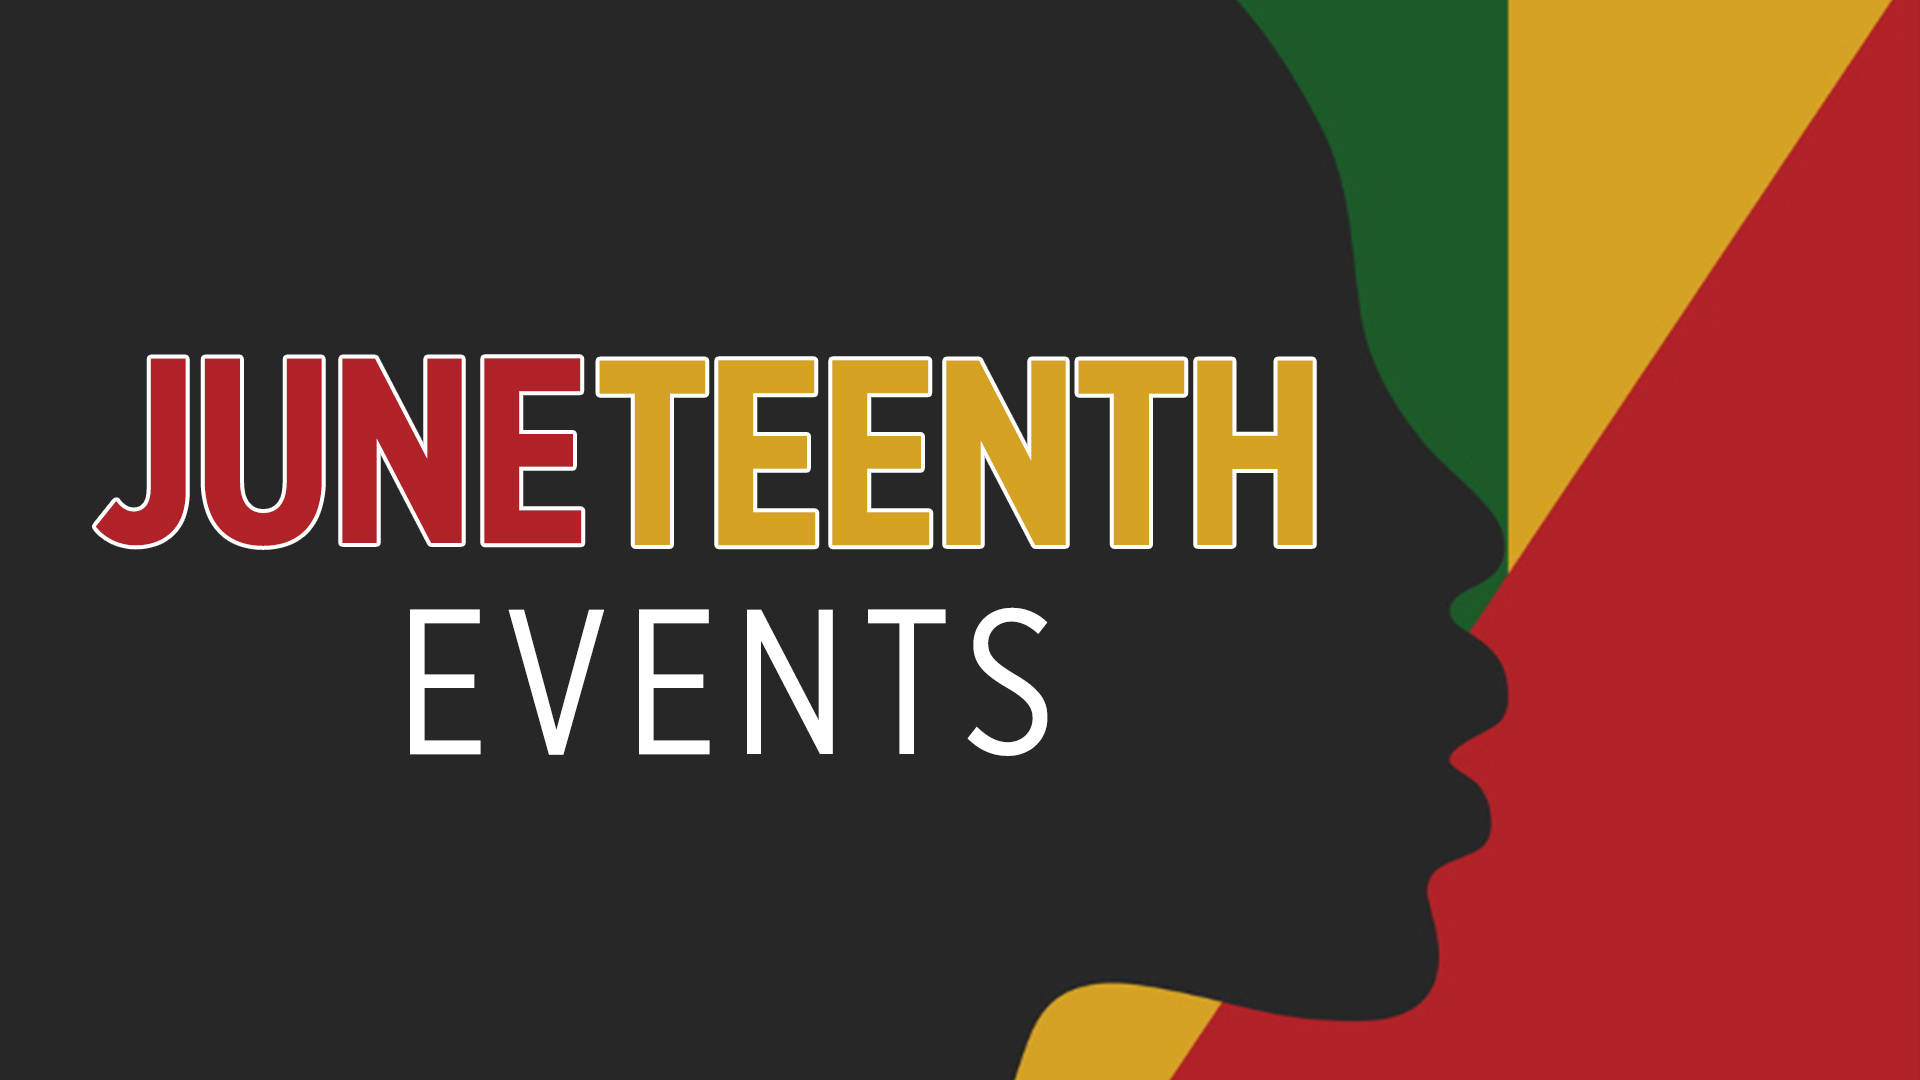 Colorful Juneteenth Events Background